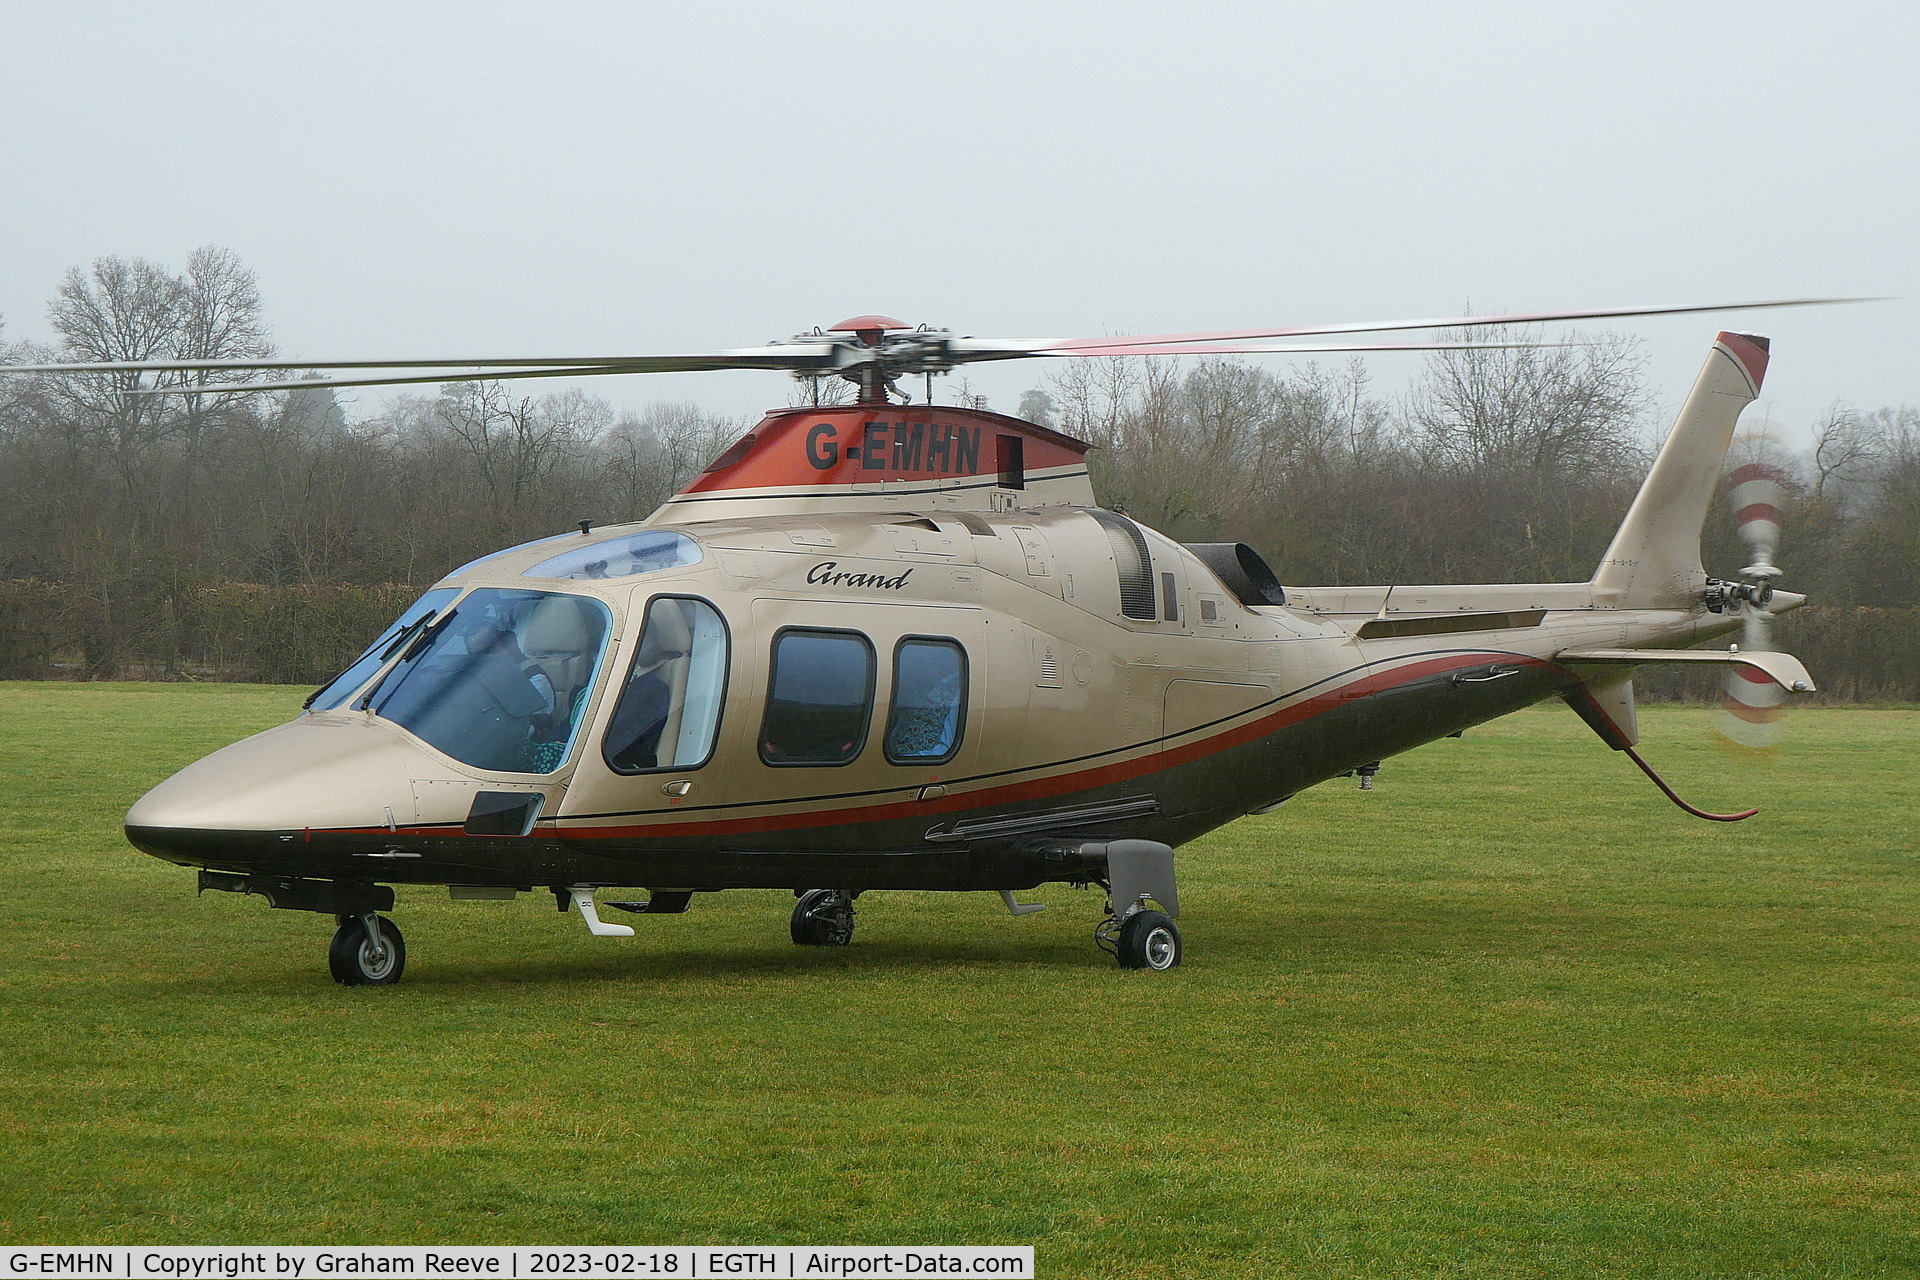 G-EMHN, 2010 Agusta A109S Grand C/N 22154, On the ground at Old Warden